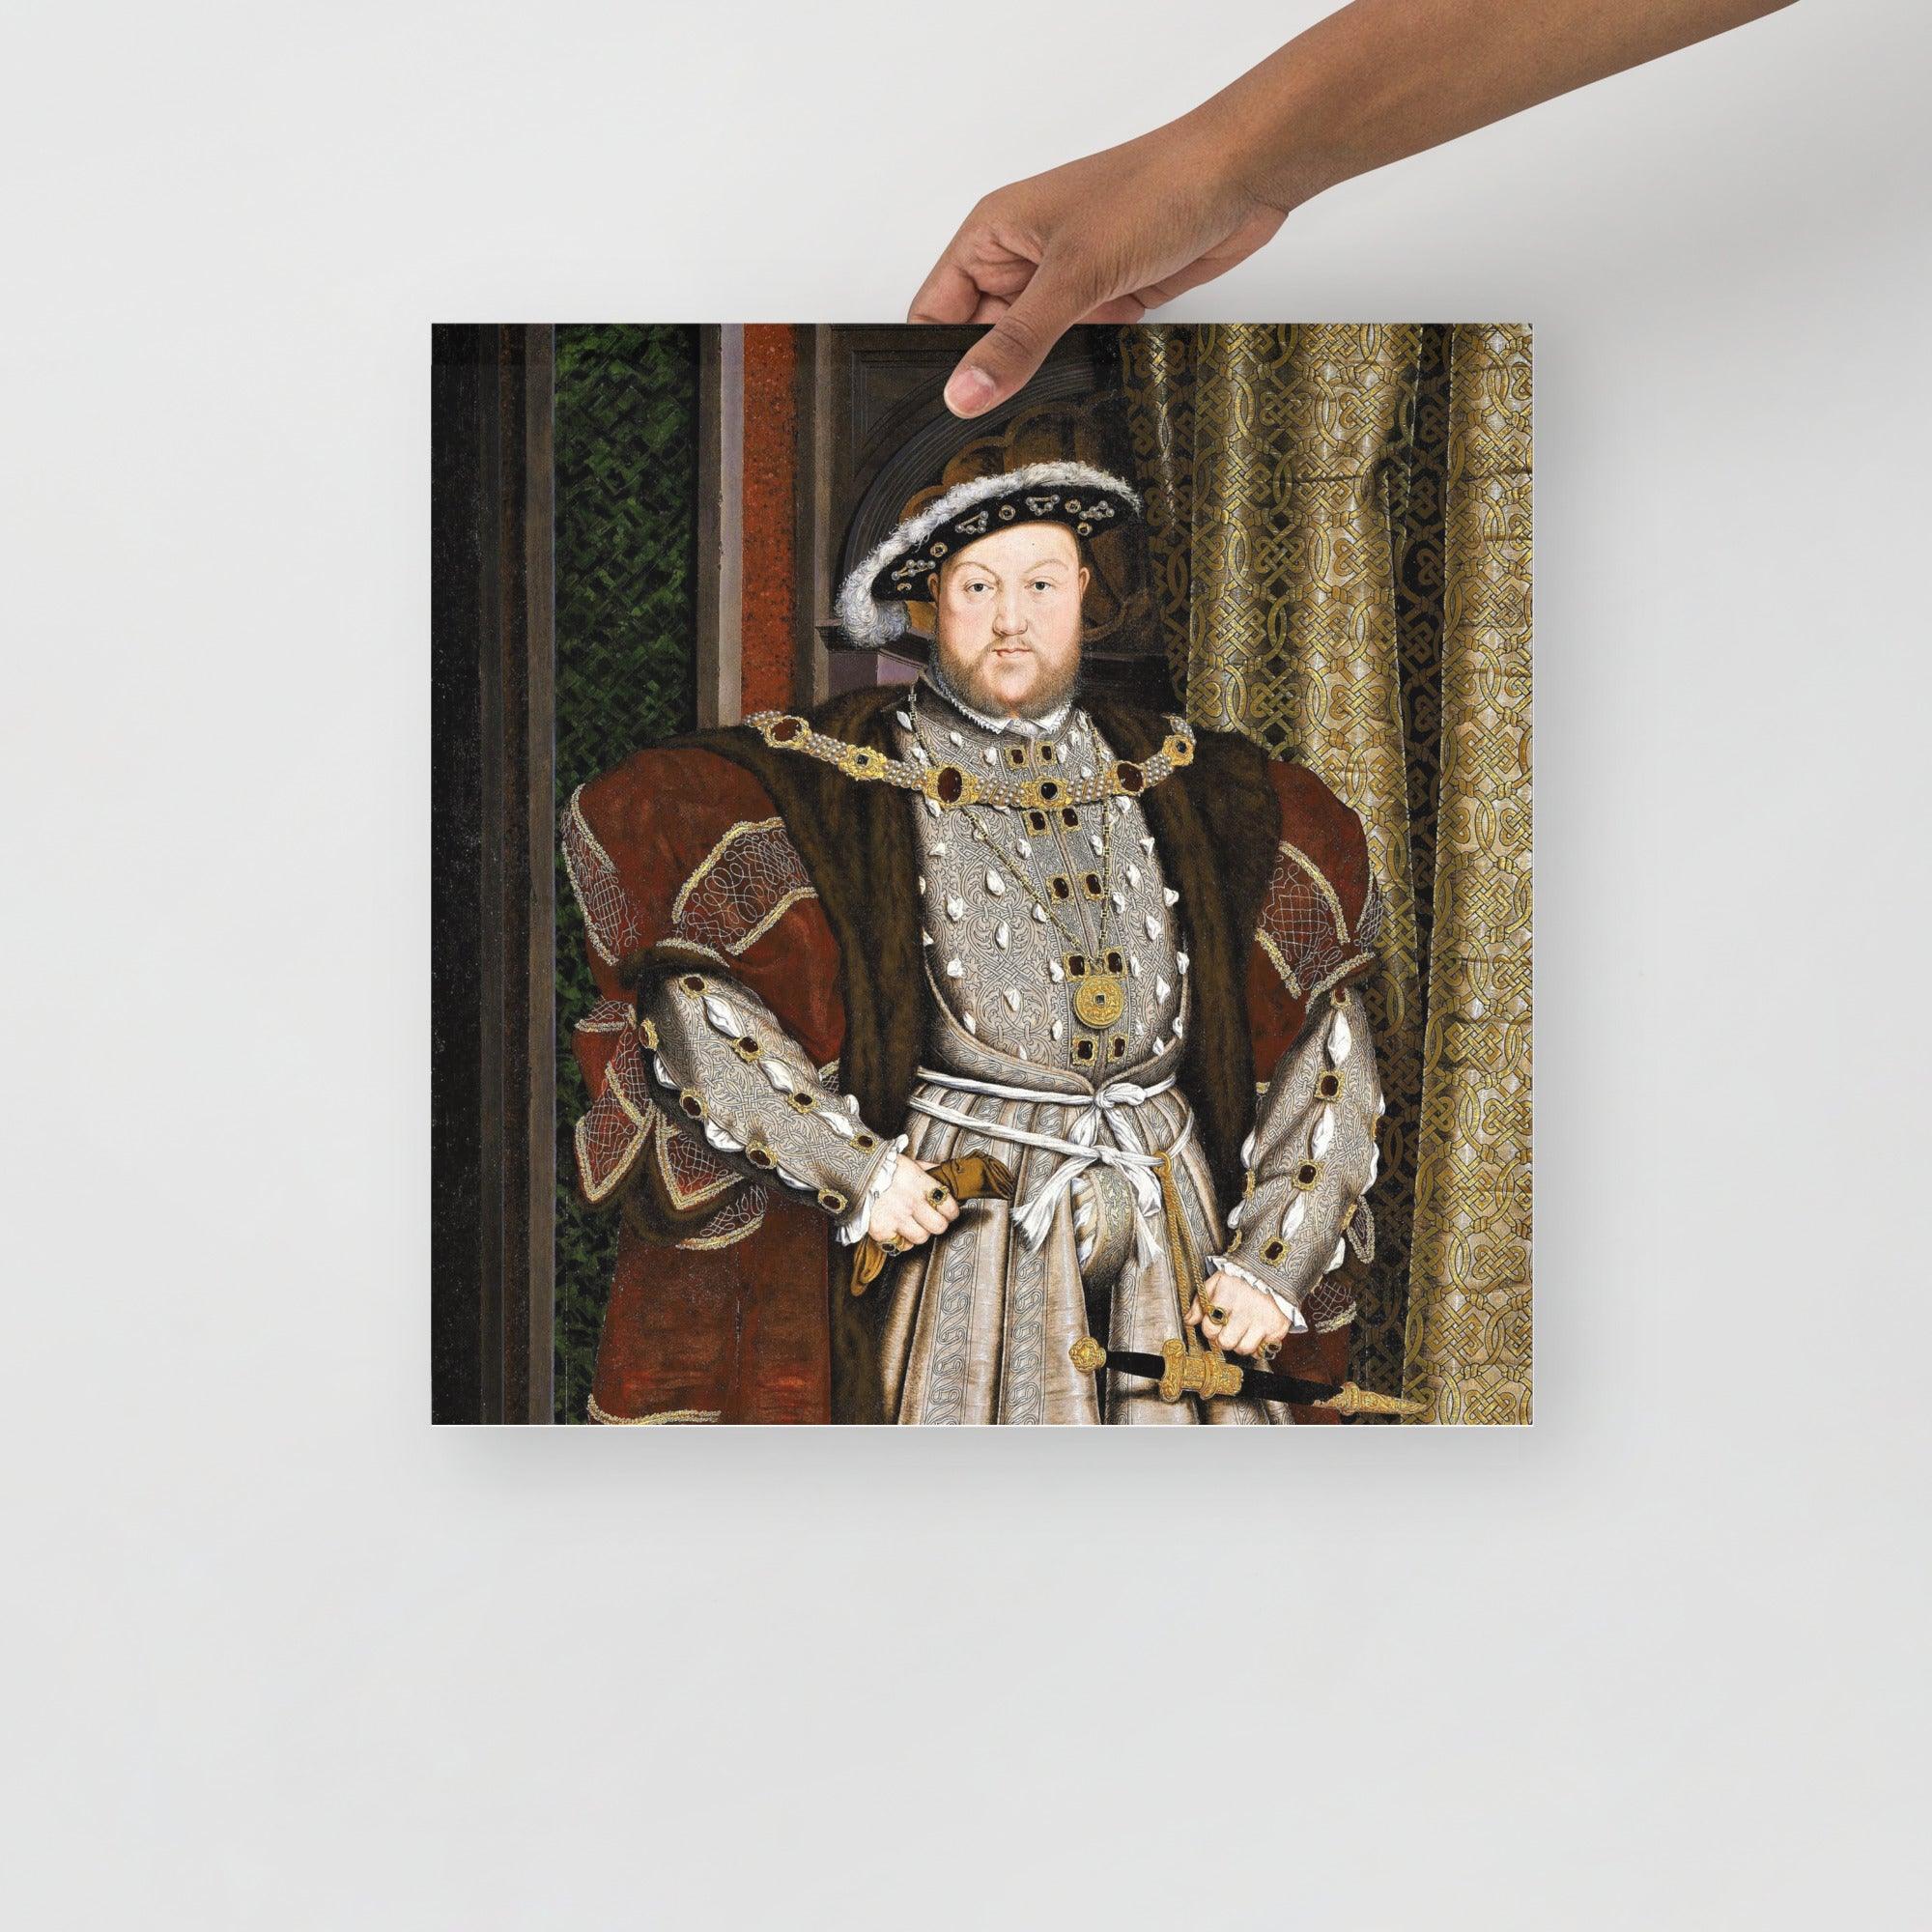 A Henry VIII Of England poster on a plain backdrop in size 16x16”.